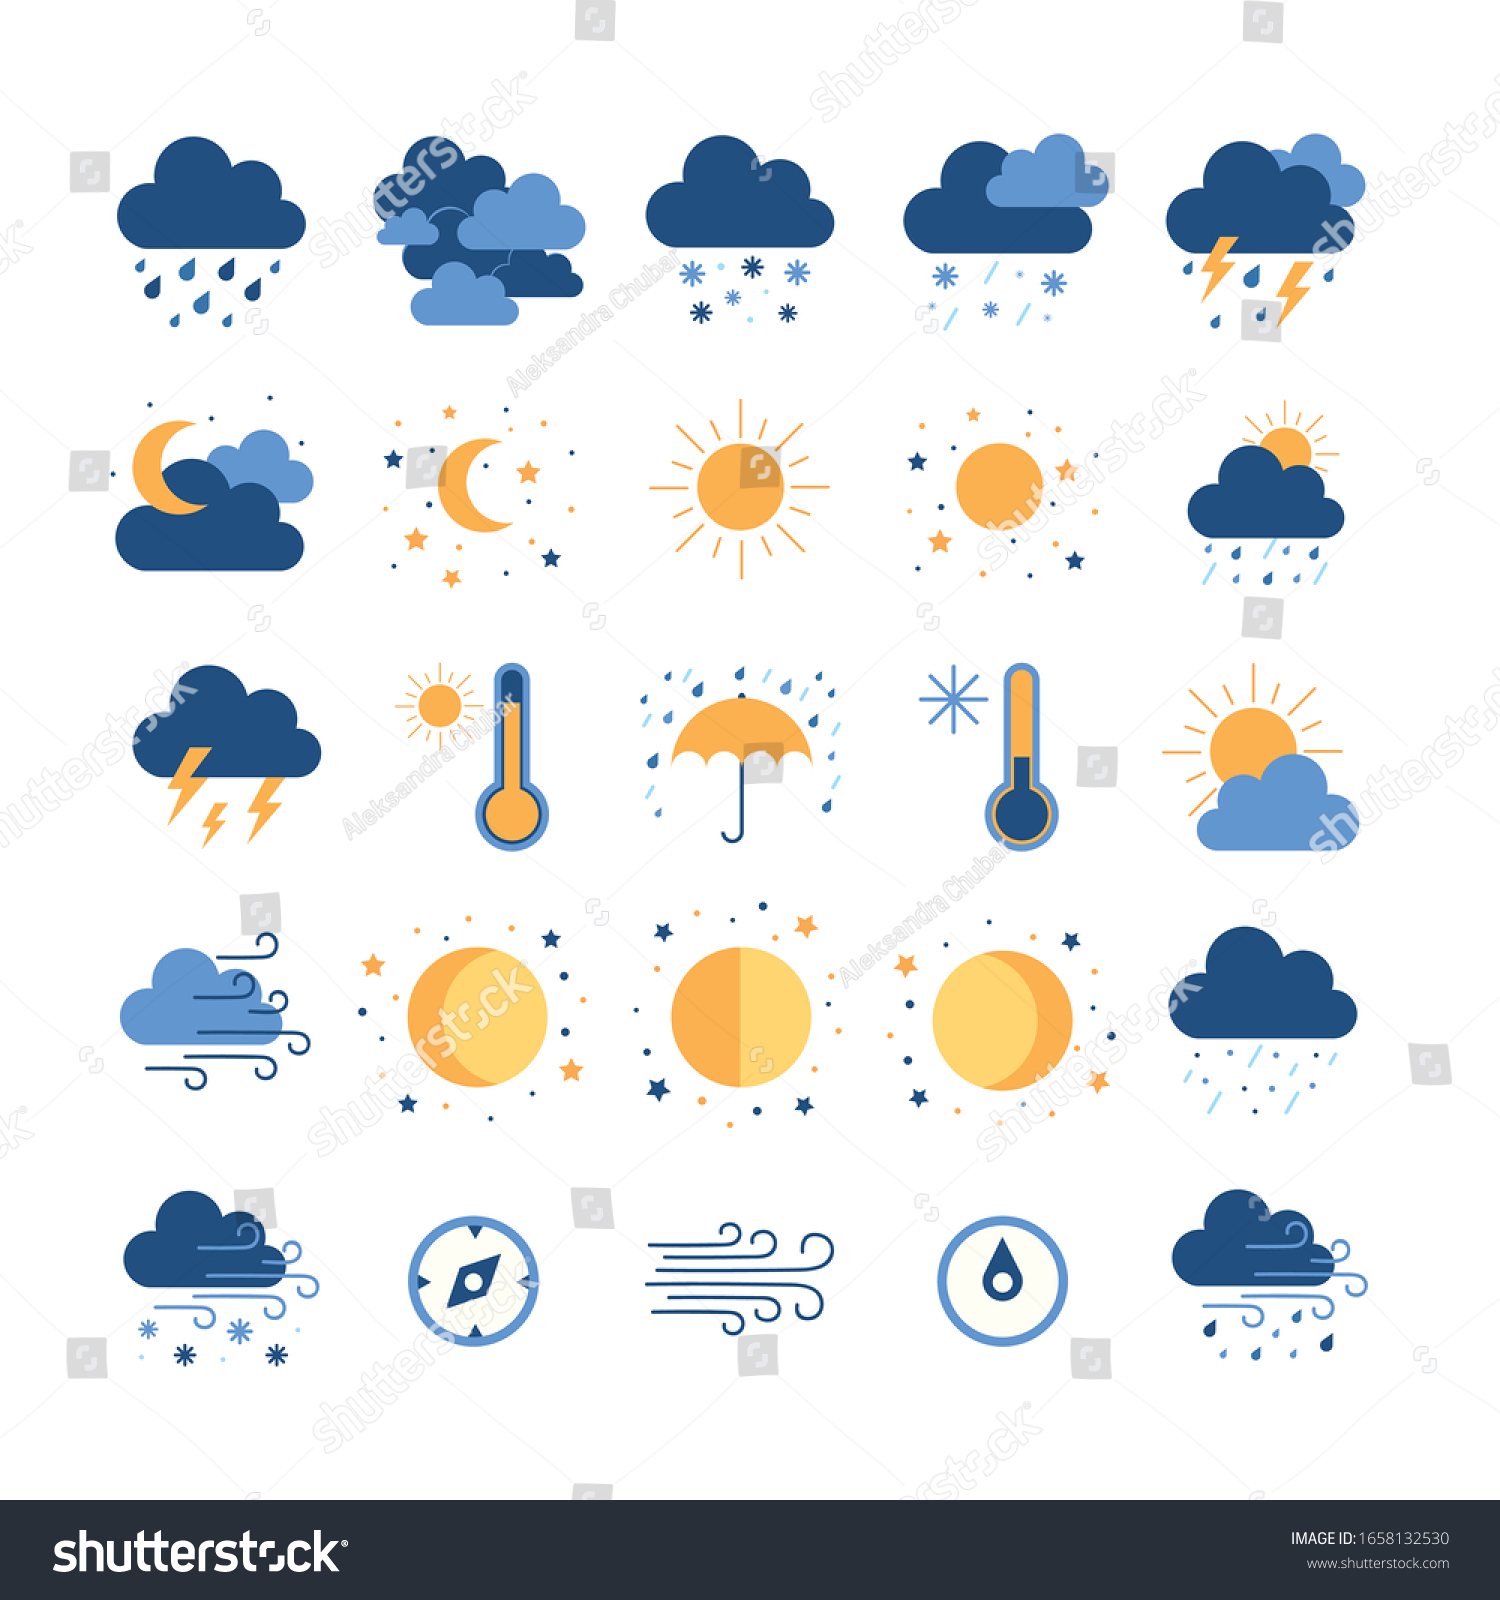 Set of simple outline icons - weather or forecast sings with clouds, snow, rain, , wind, sun and moon #1658132530